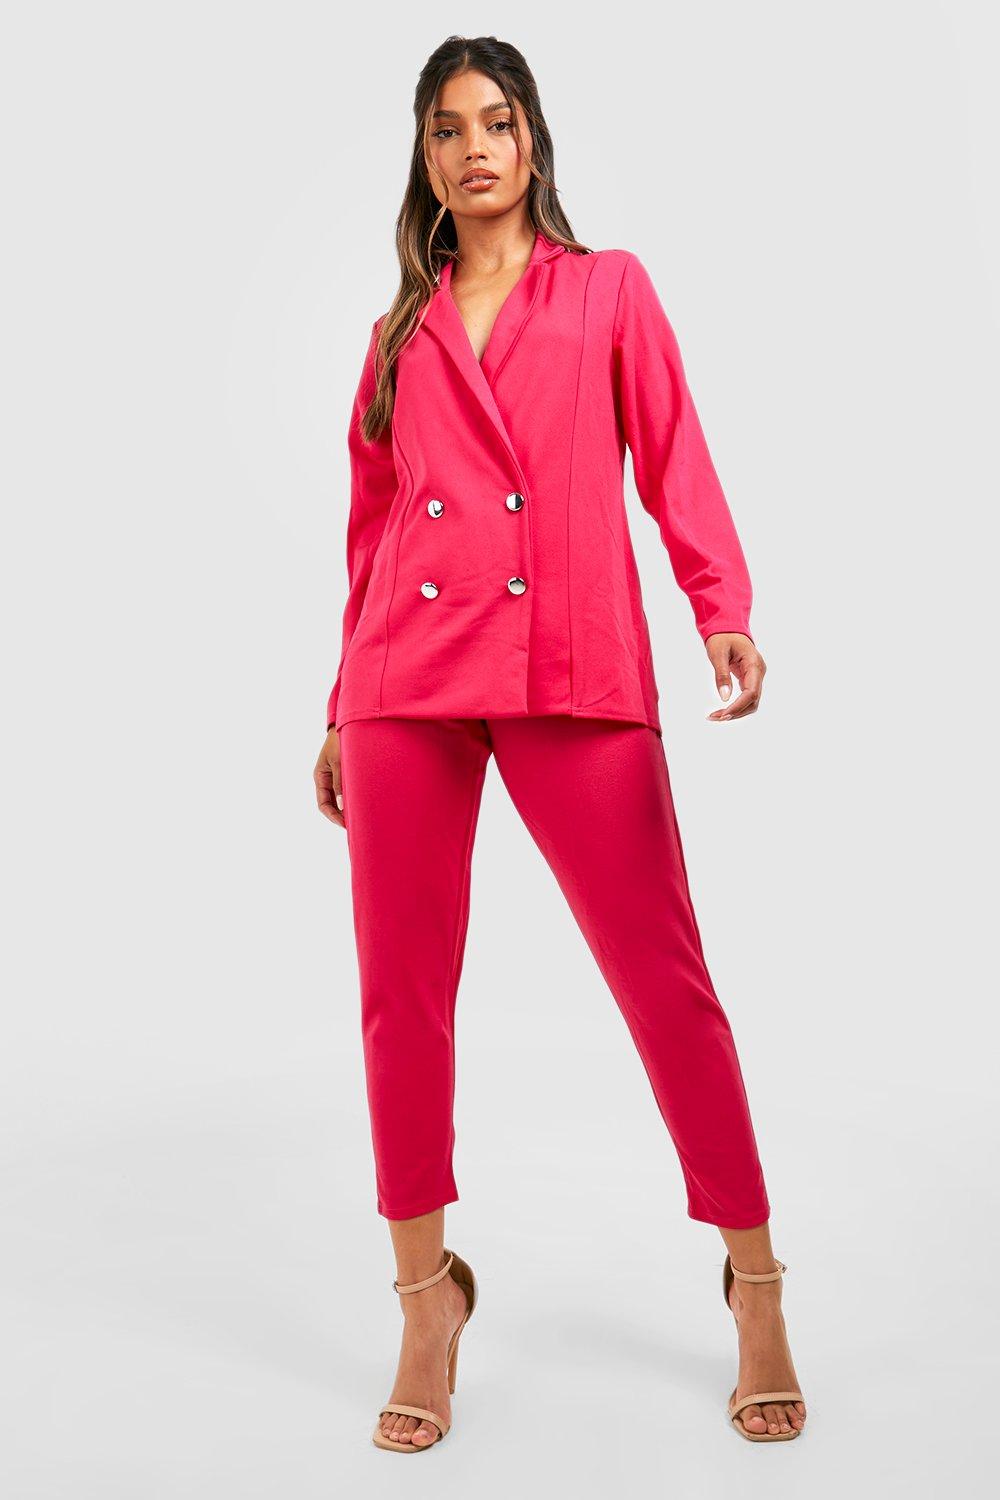 https://media.boohoo.com/i/boohoo/fzz67666_hot%20pink_xl_2/female-hot%20pink-jersey-double-breasted-blazer-and-trouser-suit-set